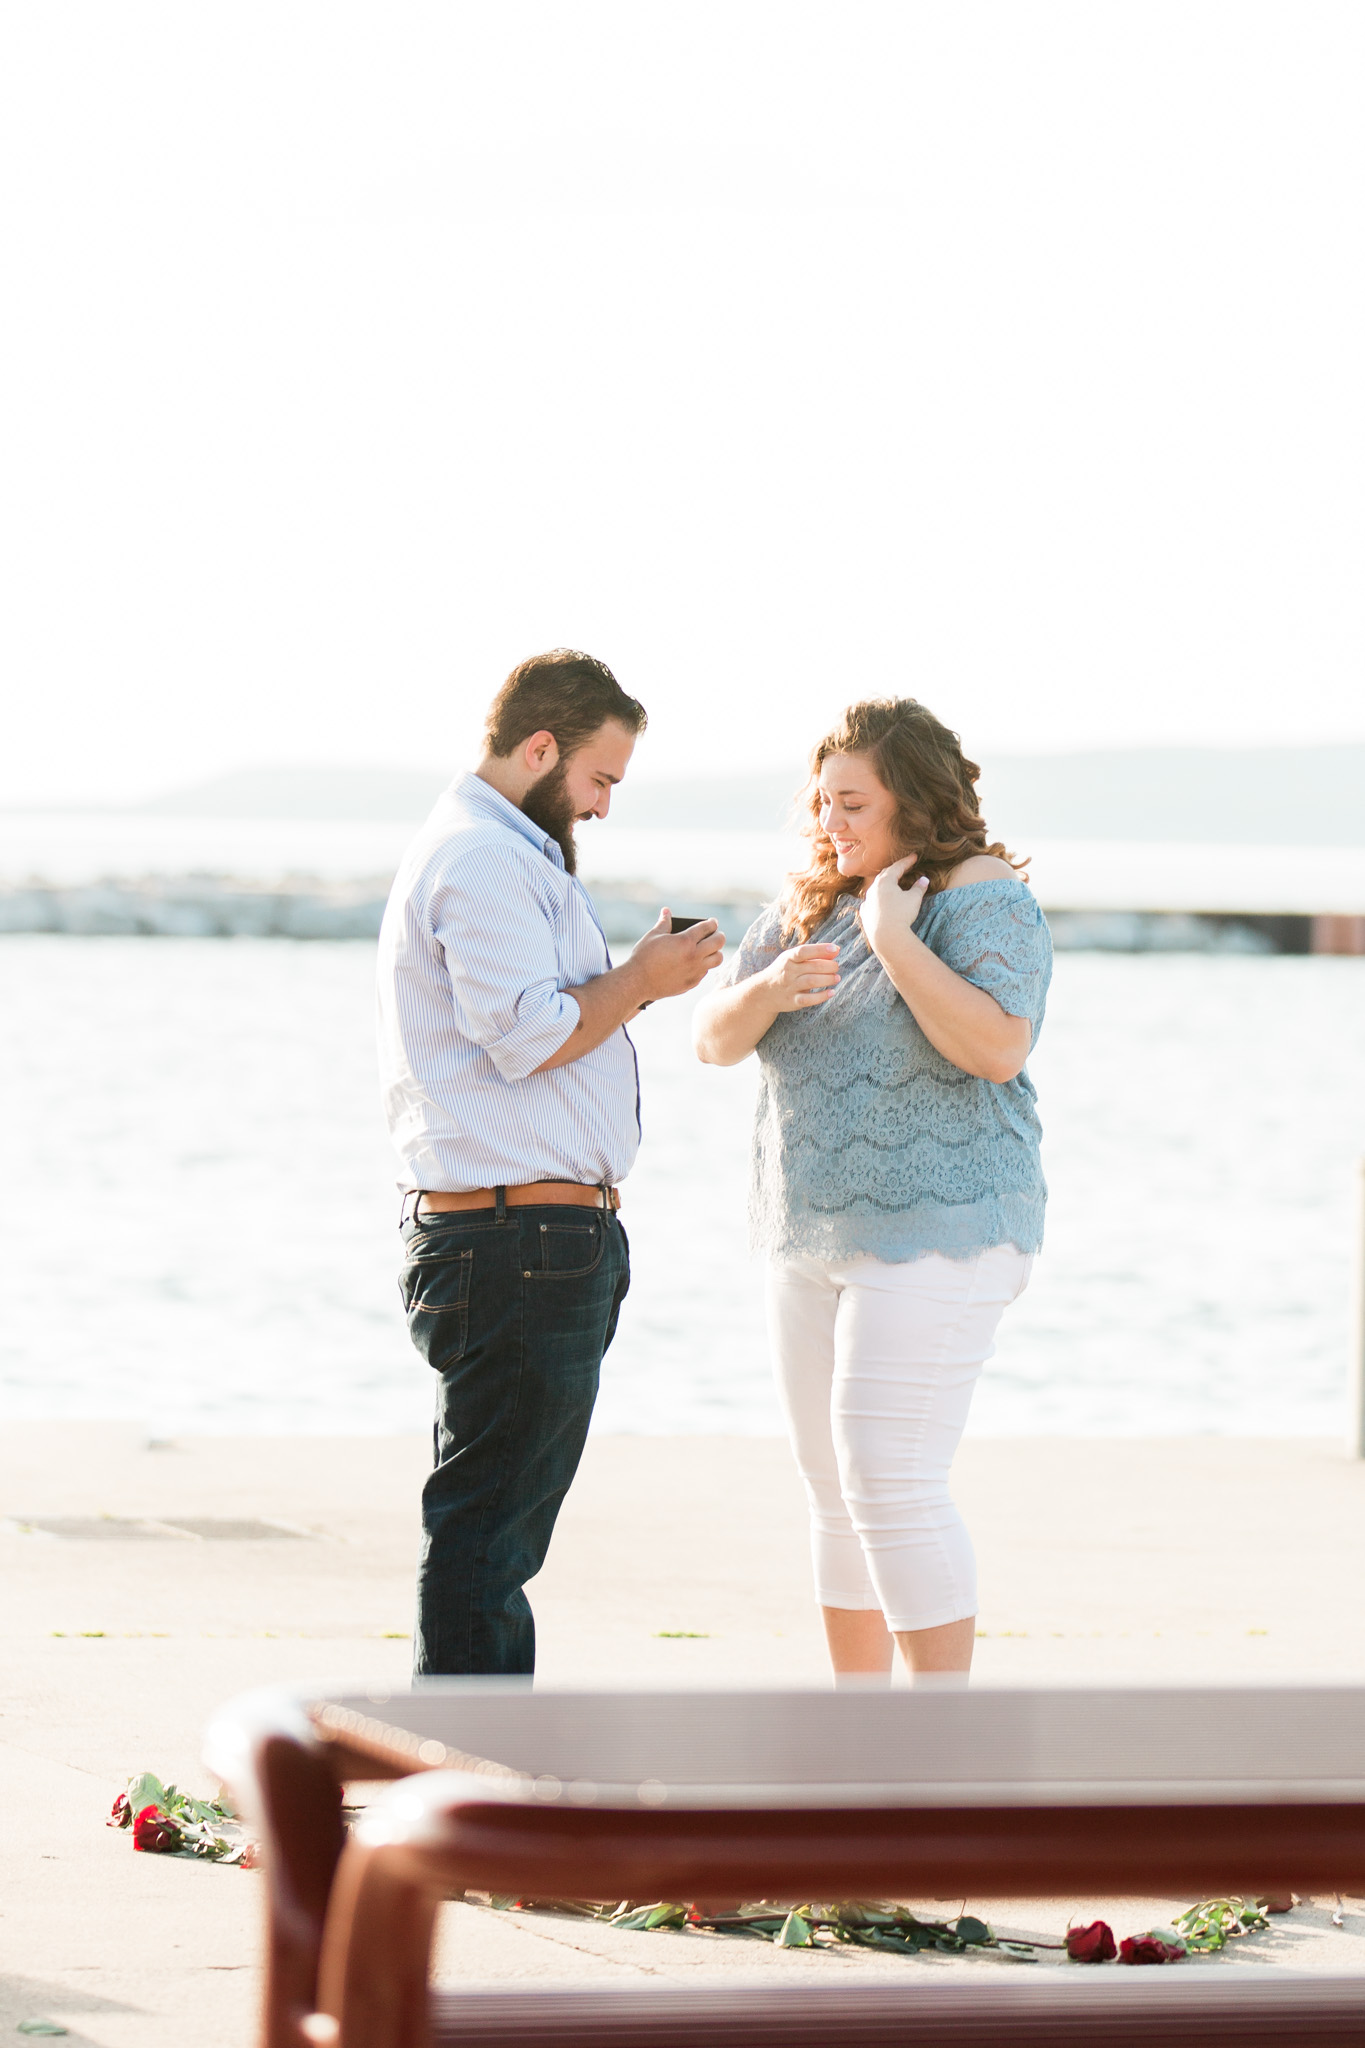 Romantic Petoskey Michigan Proposal on the Pier with Rose Trail | How He Asked | She Said Yes | Laurenda Marie Photography